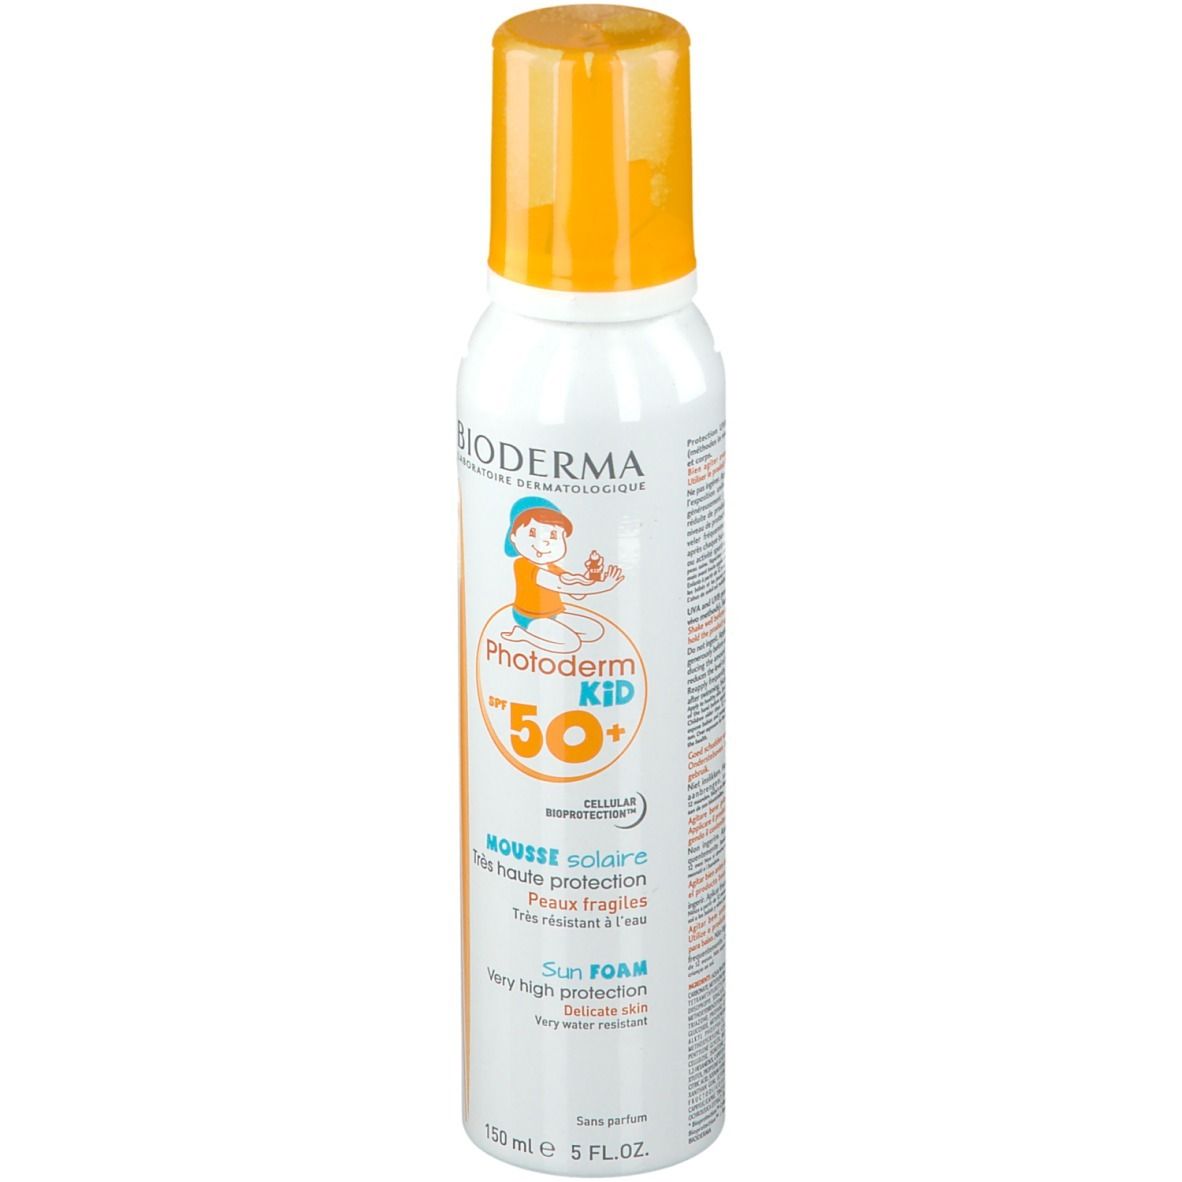 Bioderma Photoderm Kid mousse solaire SPF 50+